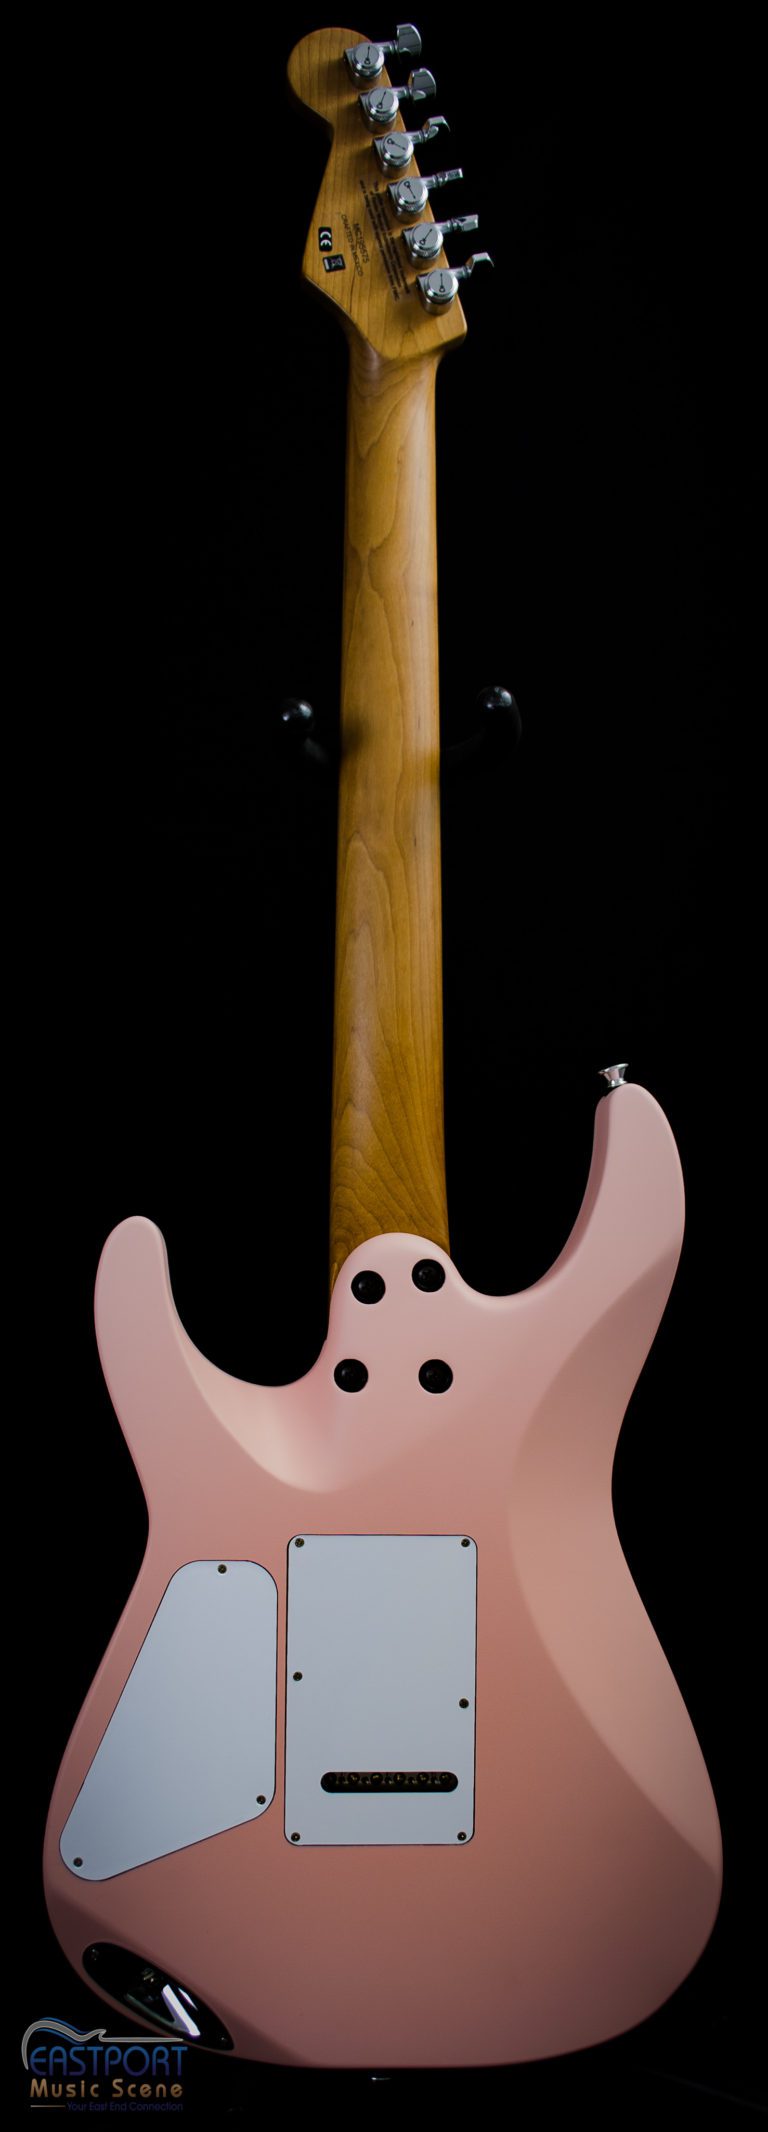 A pink guitar with black dots on the neck.